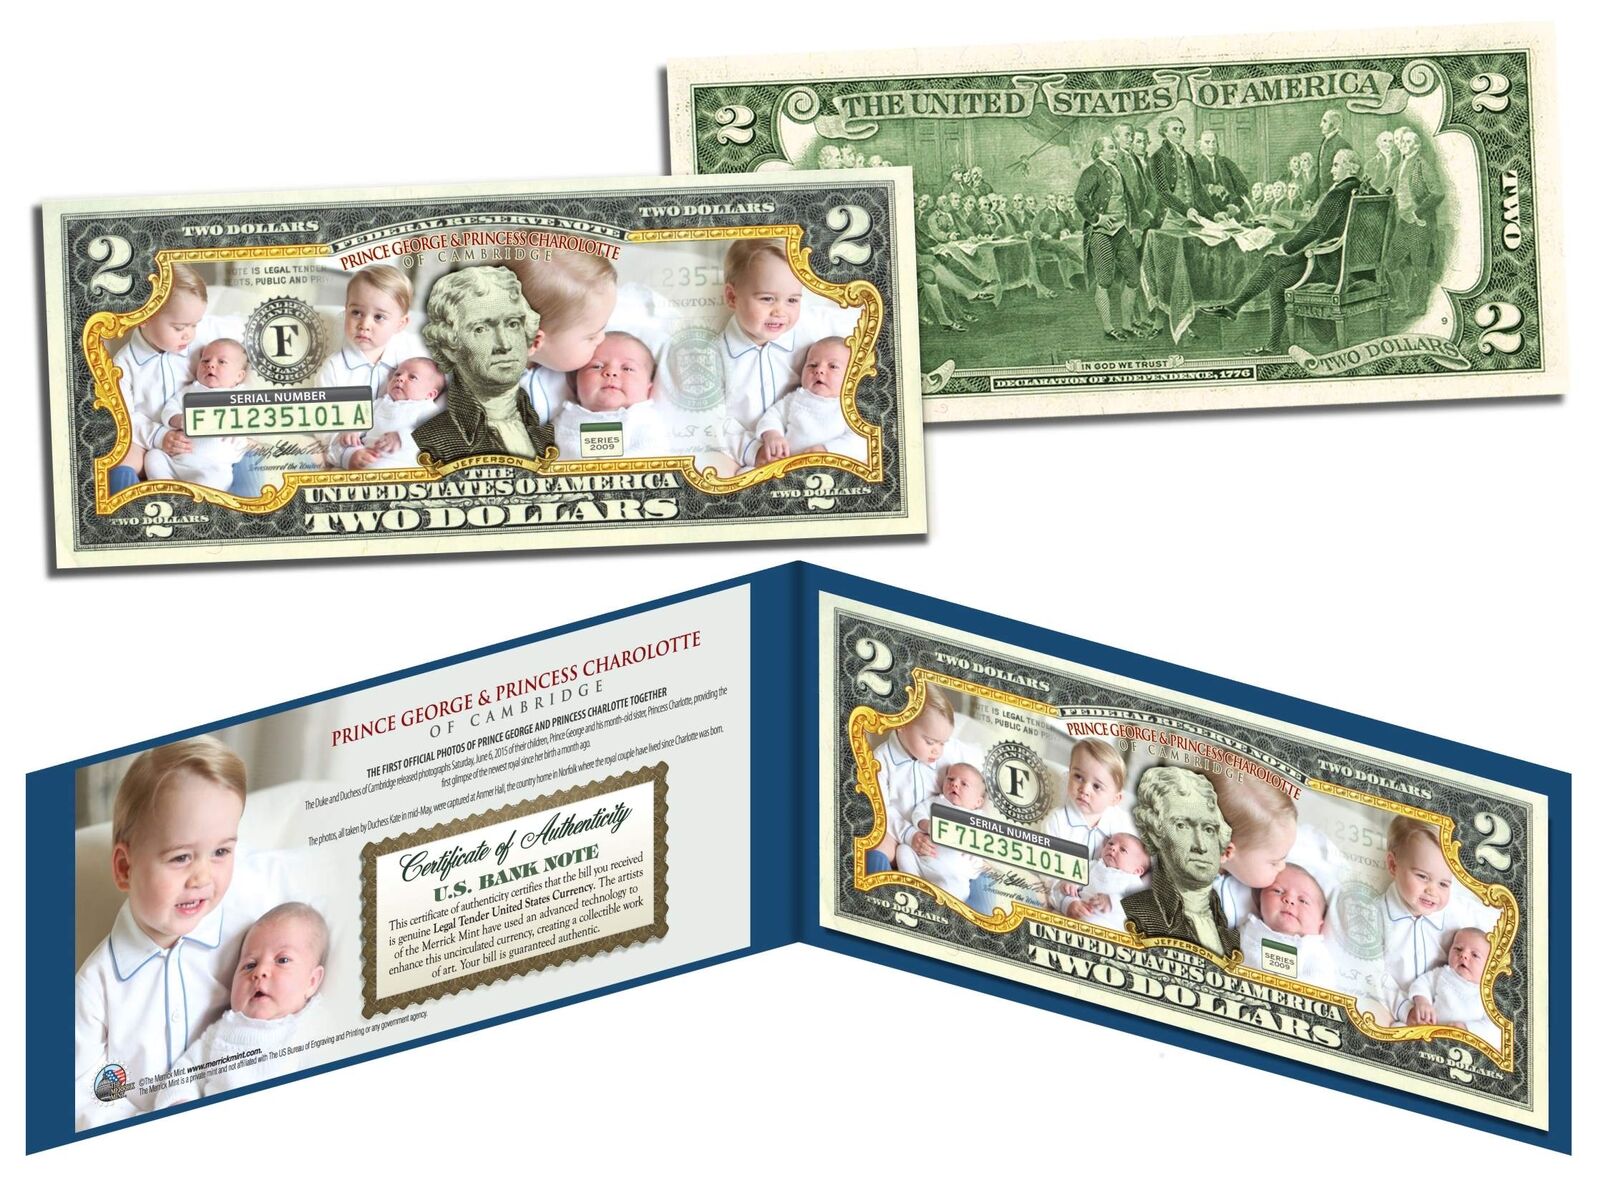 PRINCE GEORGE & PRINCESS CHARLOTTE of Cambridge Colorized U.S. $2 Bill Official